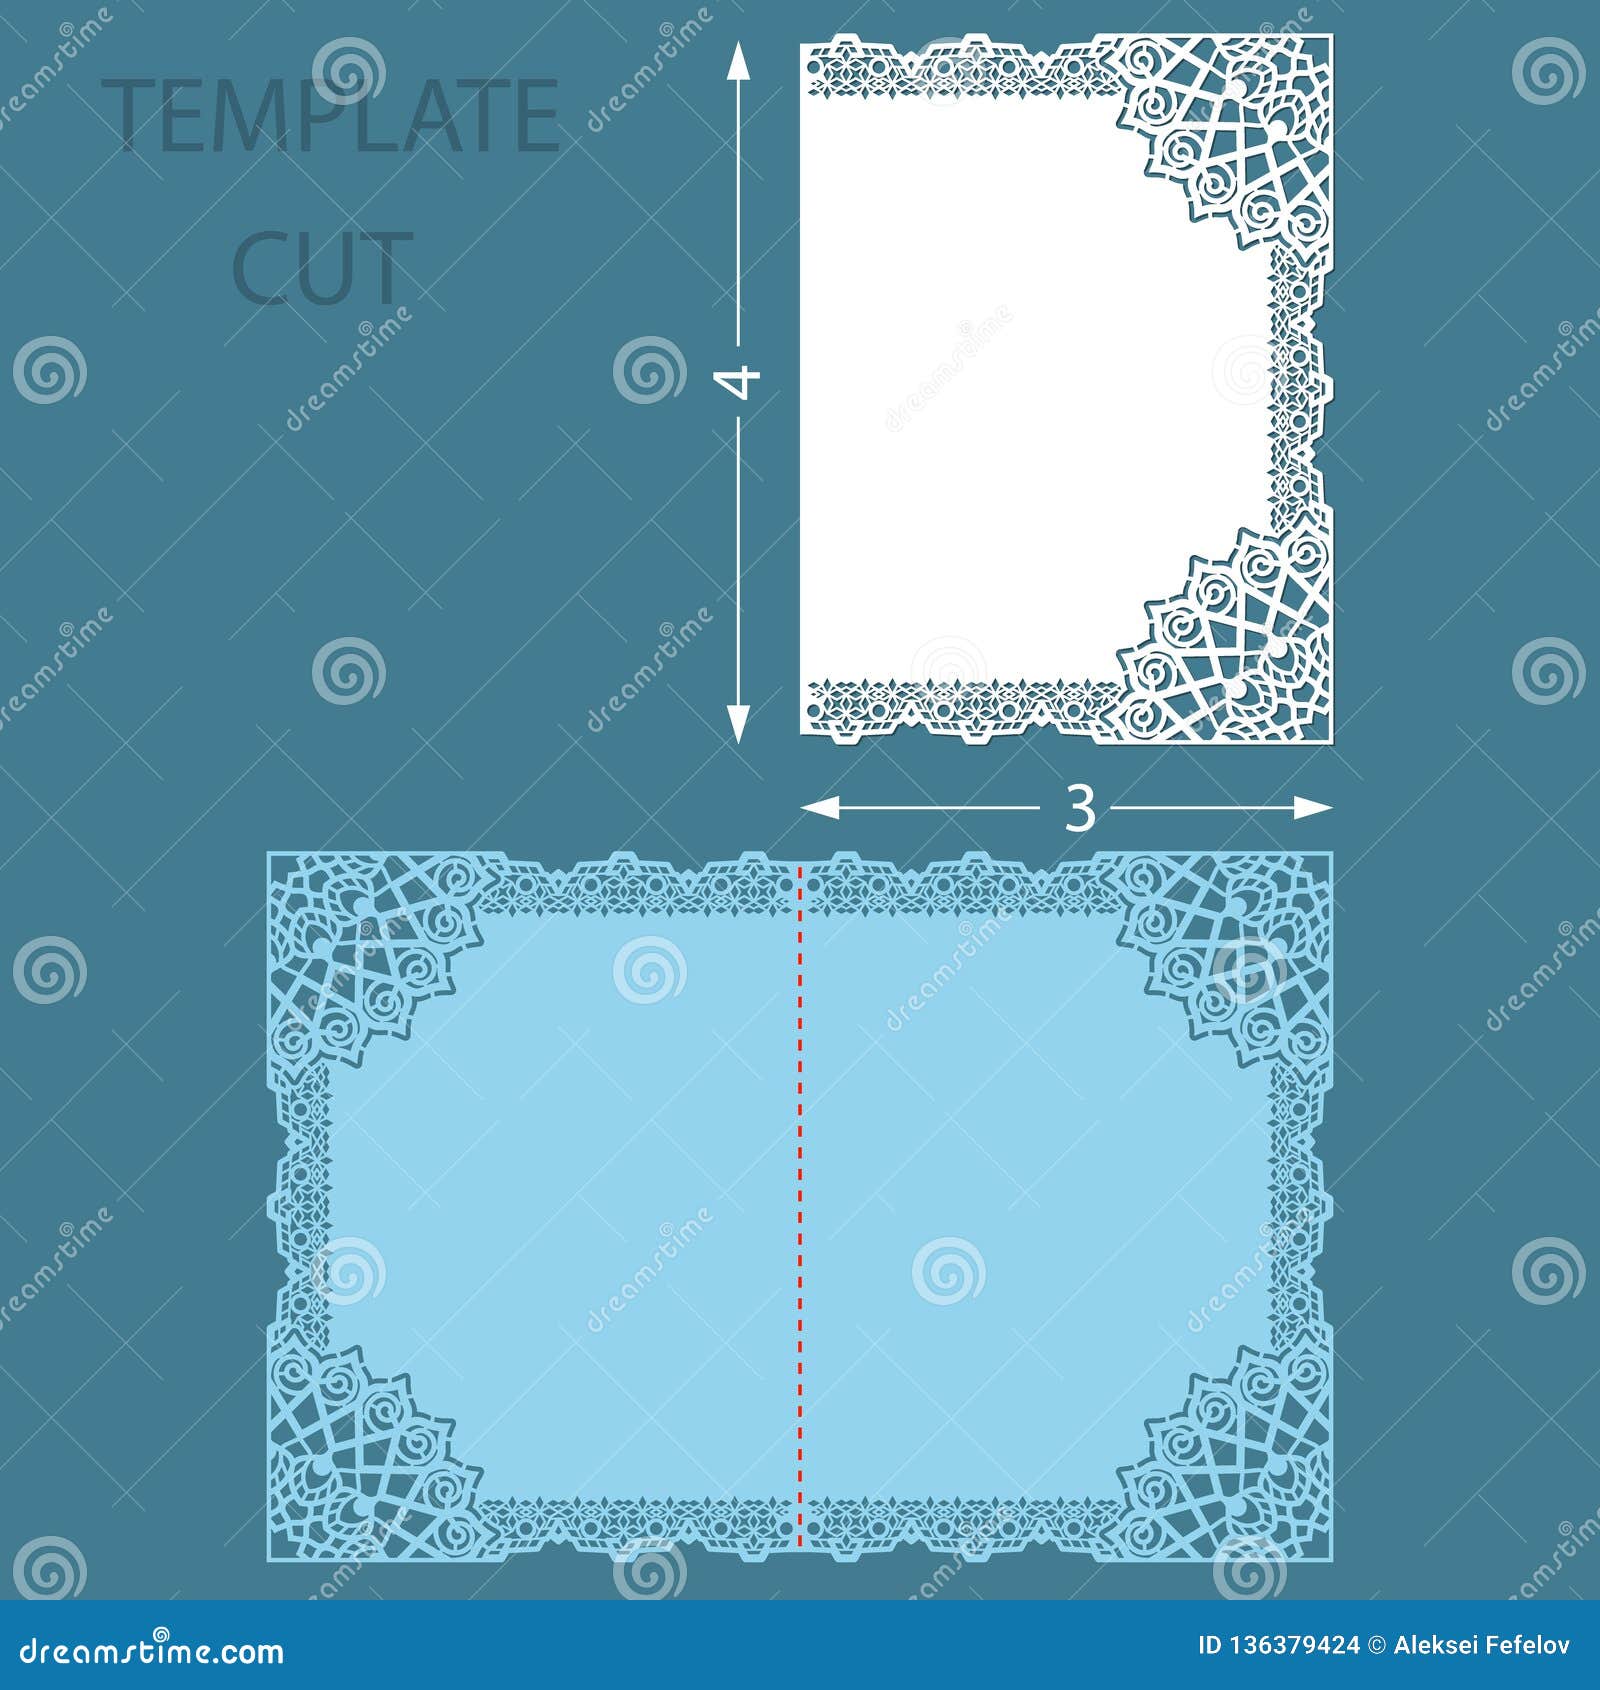 Template Greeting Congratulatory Card With A Decorative